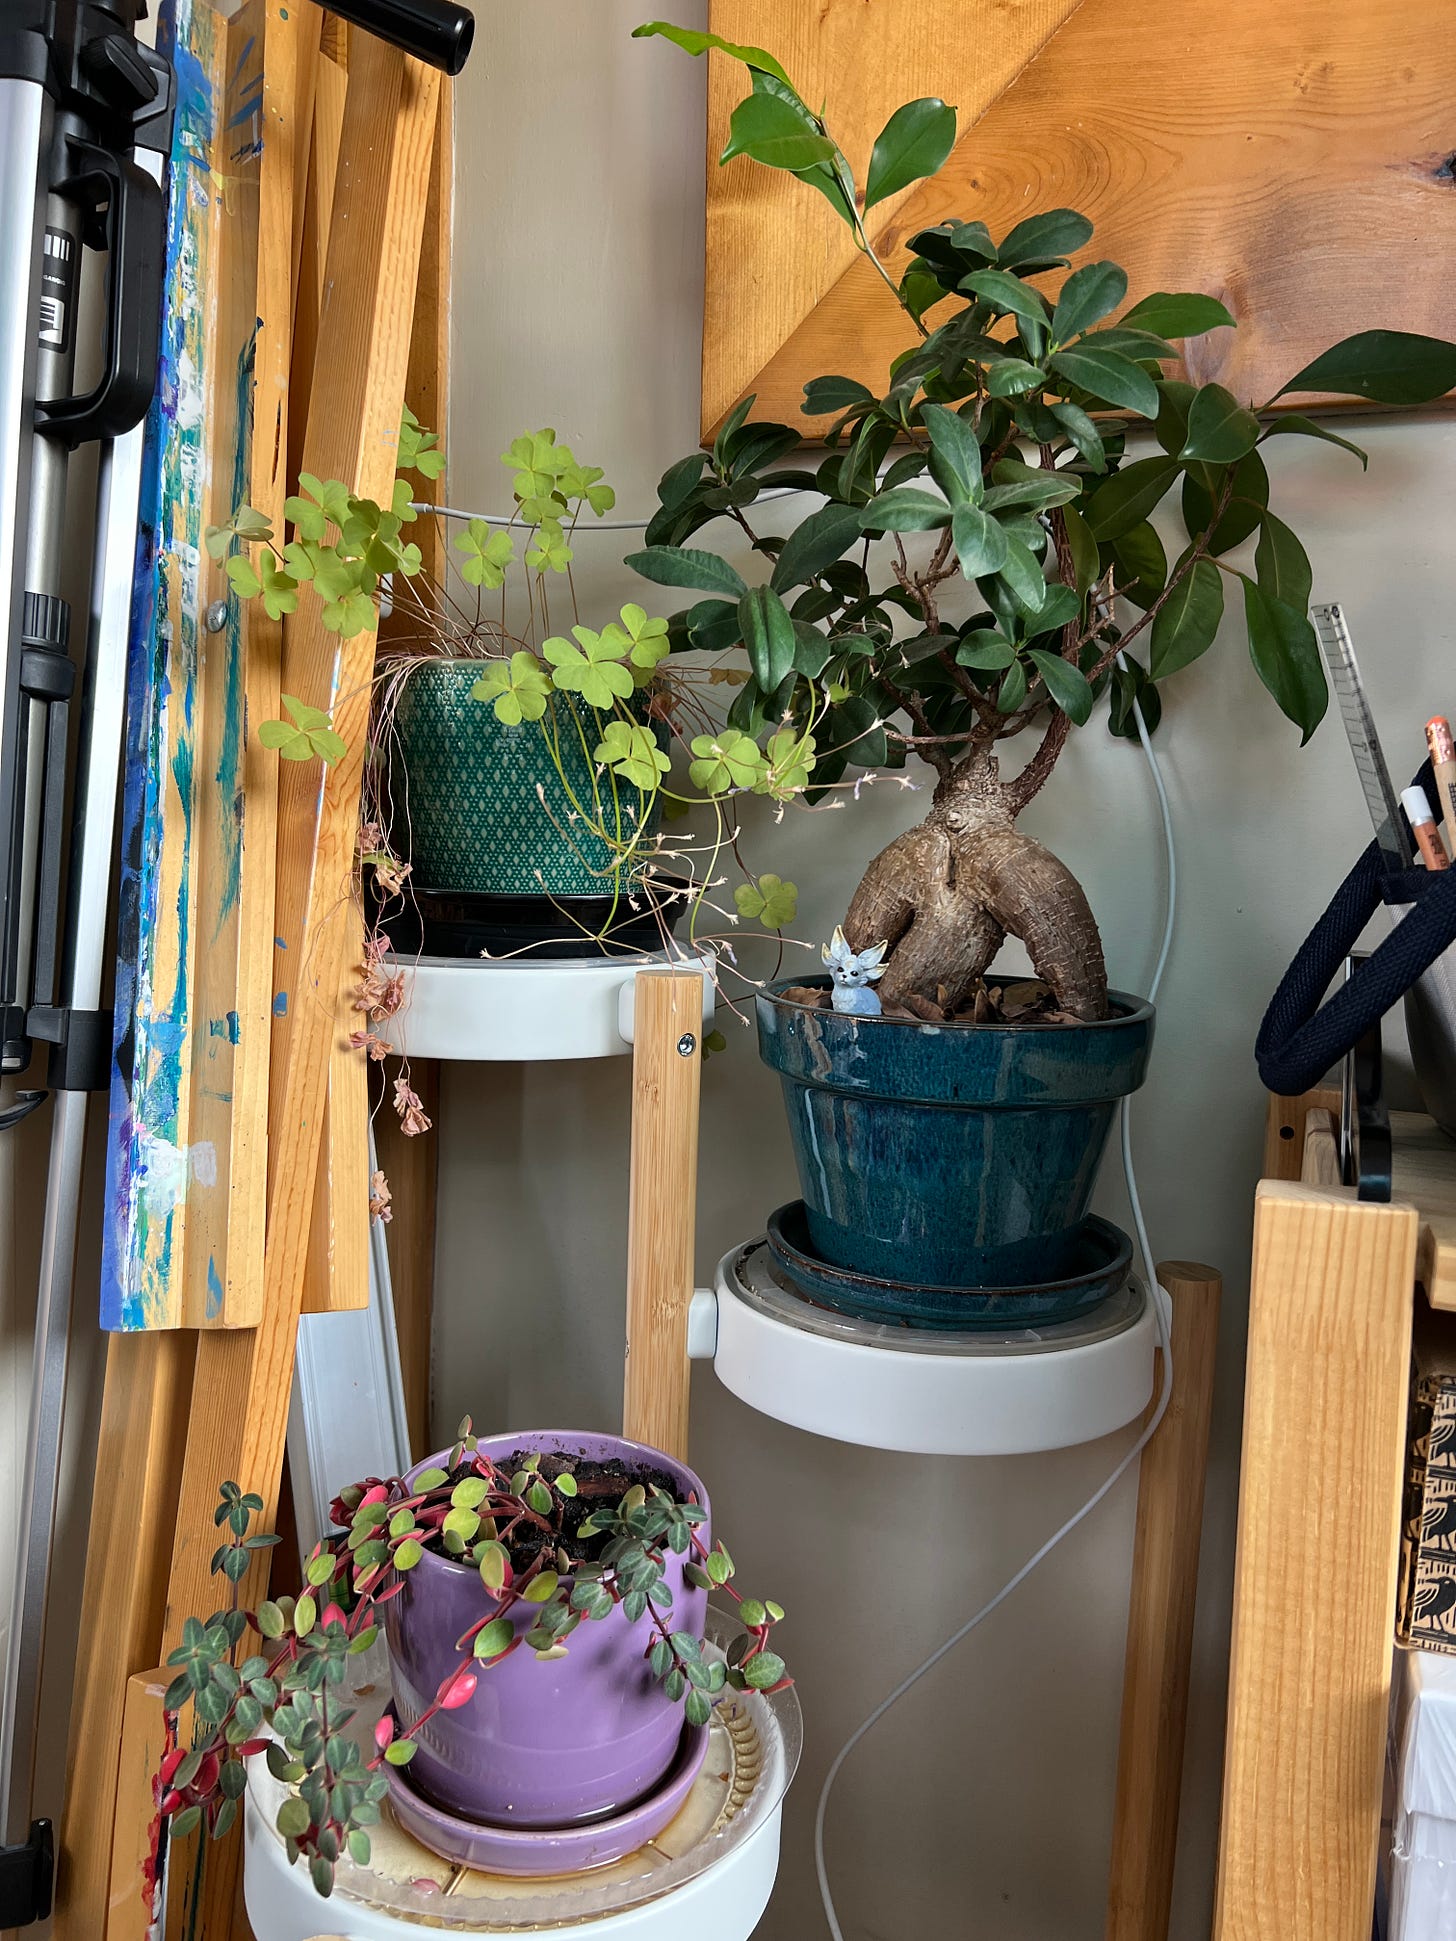 I have a lot of plants in my studio space too, which I gotta say, really helps with the general vibe. Here are three of the little darlings on a tiered plant sand, my easel and a camera tri-pod leaning up against the wall next to them. 